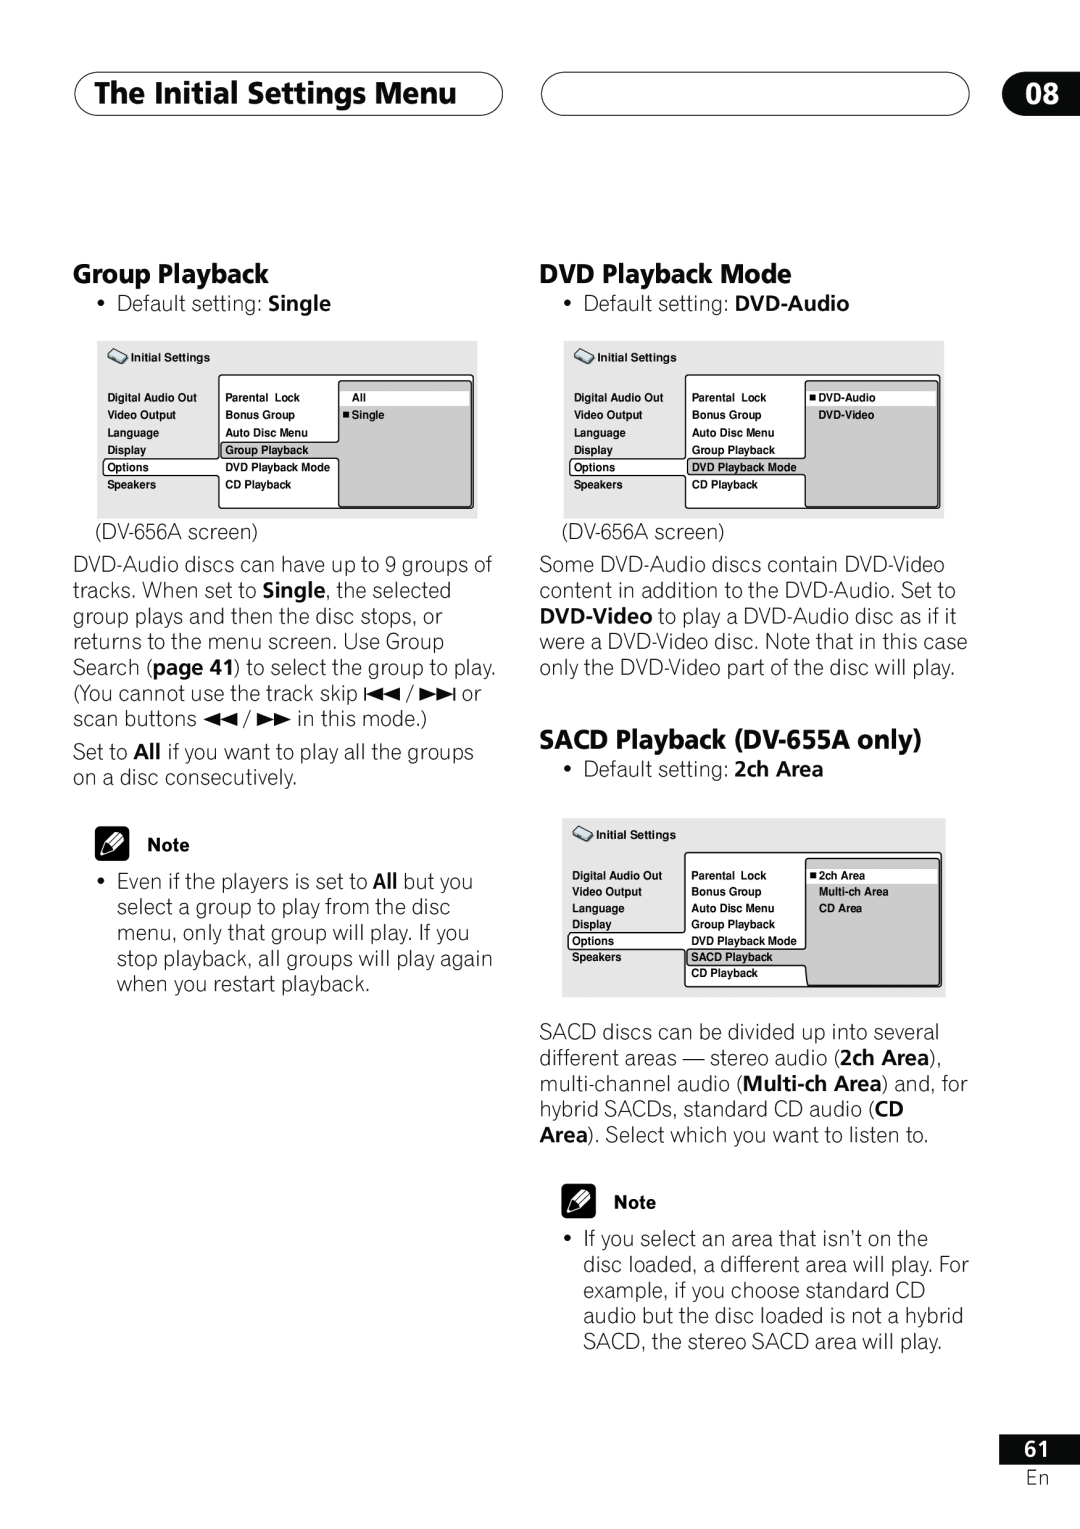 Pioneer DV-656A Group Playback, DVD Playback Mode, SACD Playback DV-655A only, The Initial Settings Menu 